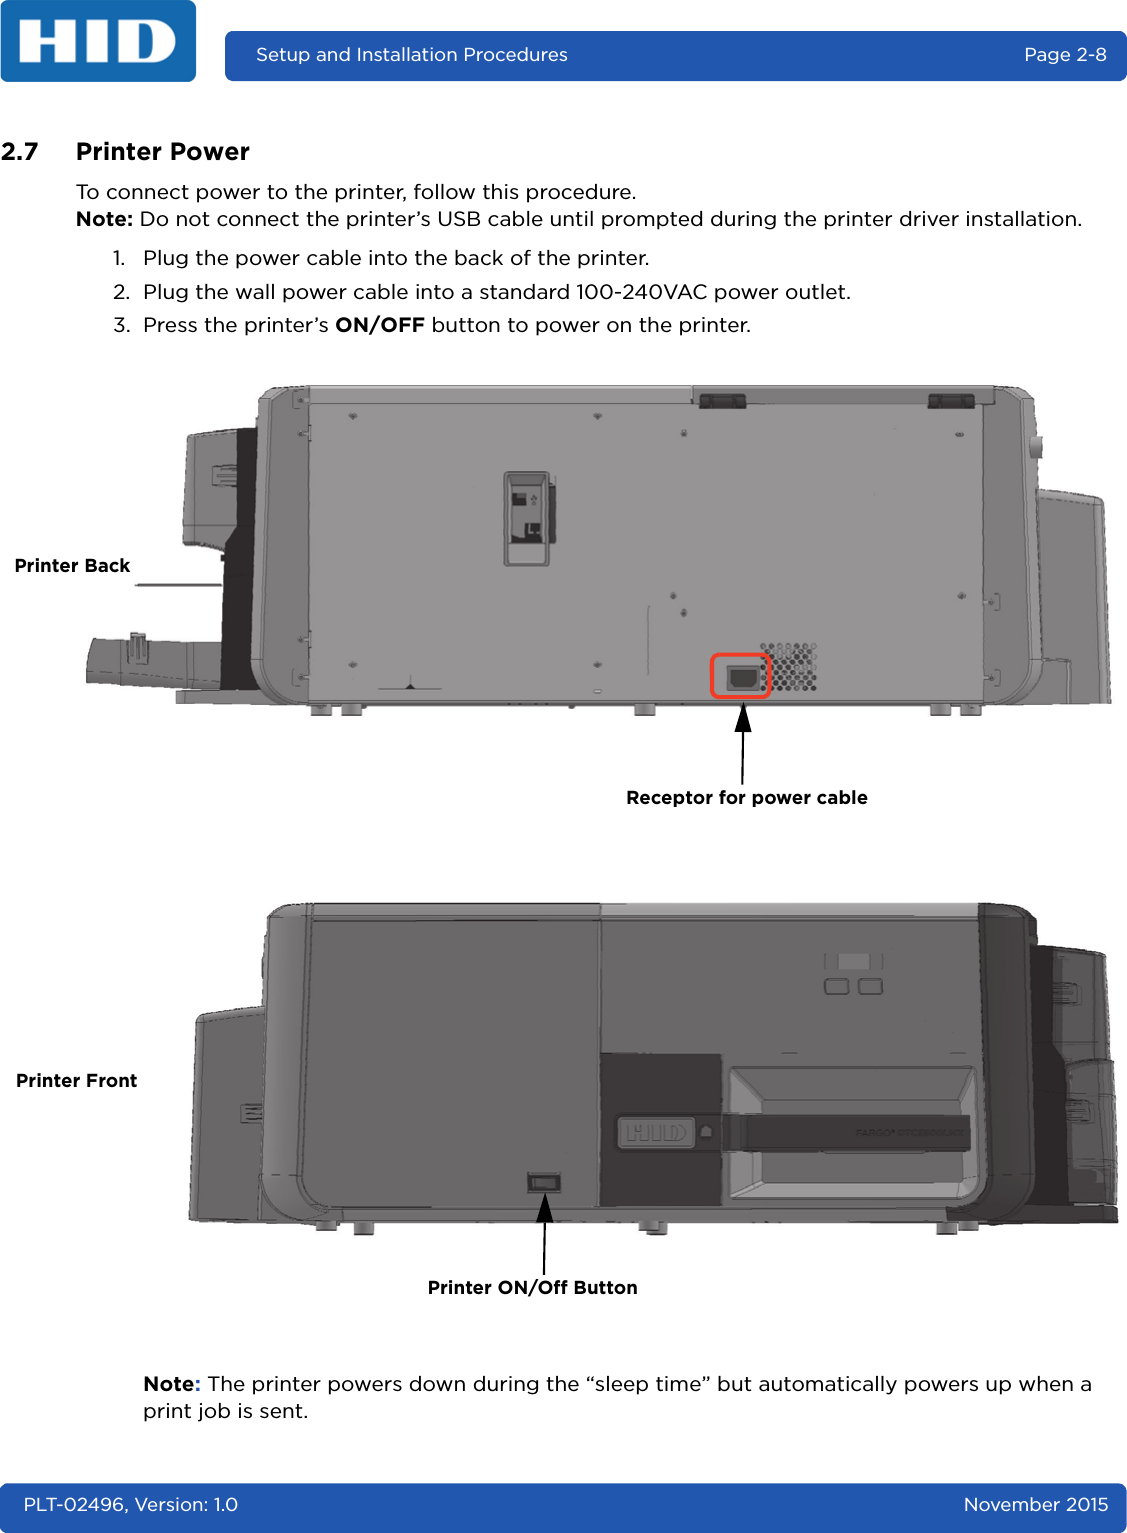 Setup and Installation Procedures  Page 2-8PLT-02496, Version: 1.0 November 20152.7 Printer PowerTo connect power to the printer, follow this procedure.Note: Do not connect the printer’s USB cable until prompted during the printer driver installation.1. Plug the power cable into the back of the printer.2. Plug the wall power cable into a standard 100-240VAC power outlet.3. Press the printer’s ON/OFF button to power on the printer.Note: The printer powers down during the “sleep time” but automatically powers up when a print job is sent.Receptor for power cablePrinter ON/Off ButtonPrinter BackPrinter Front